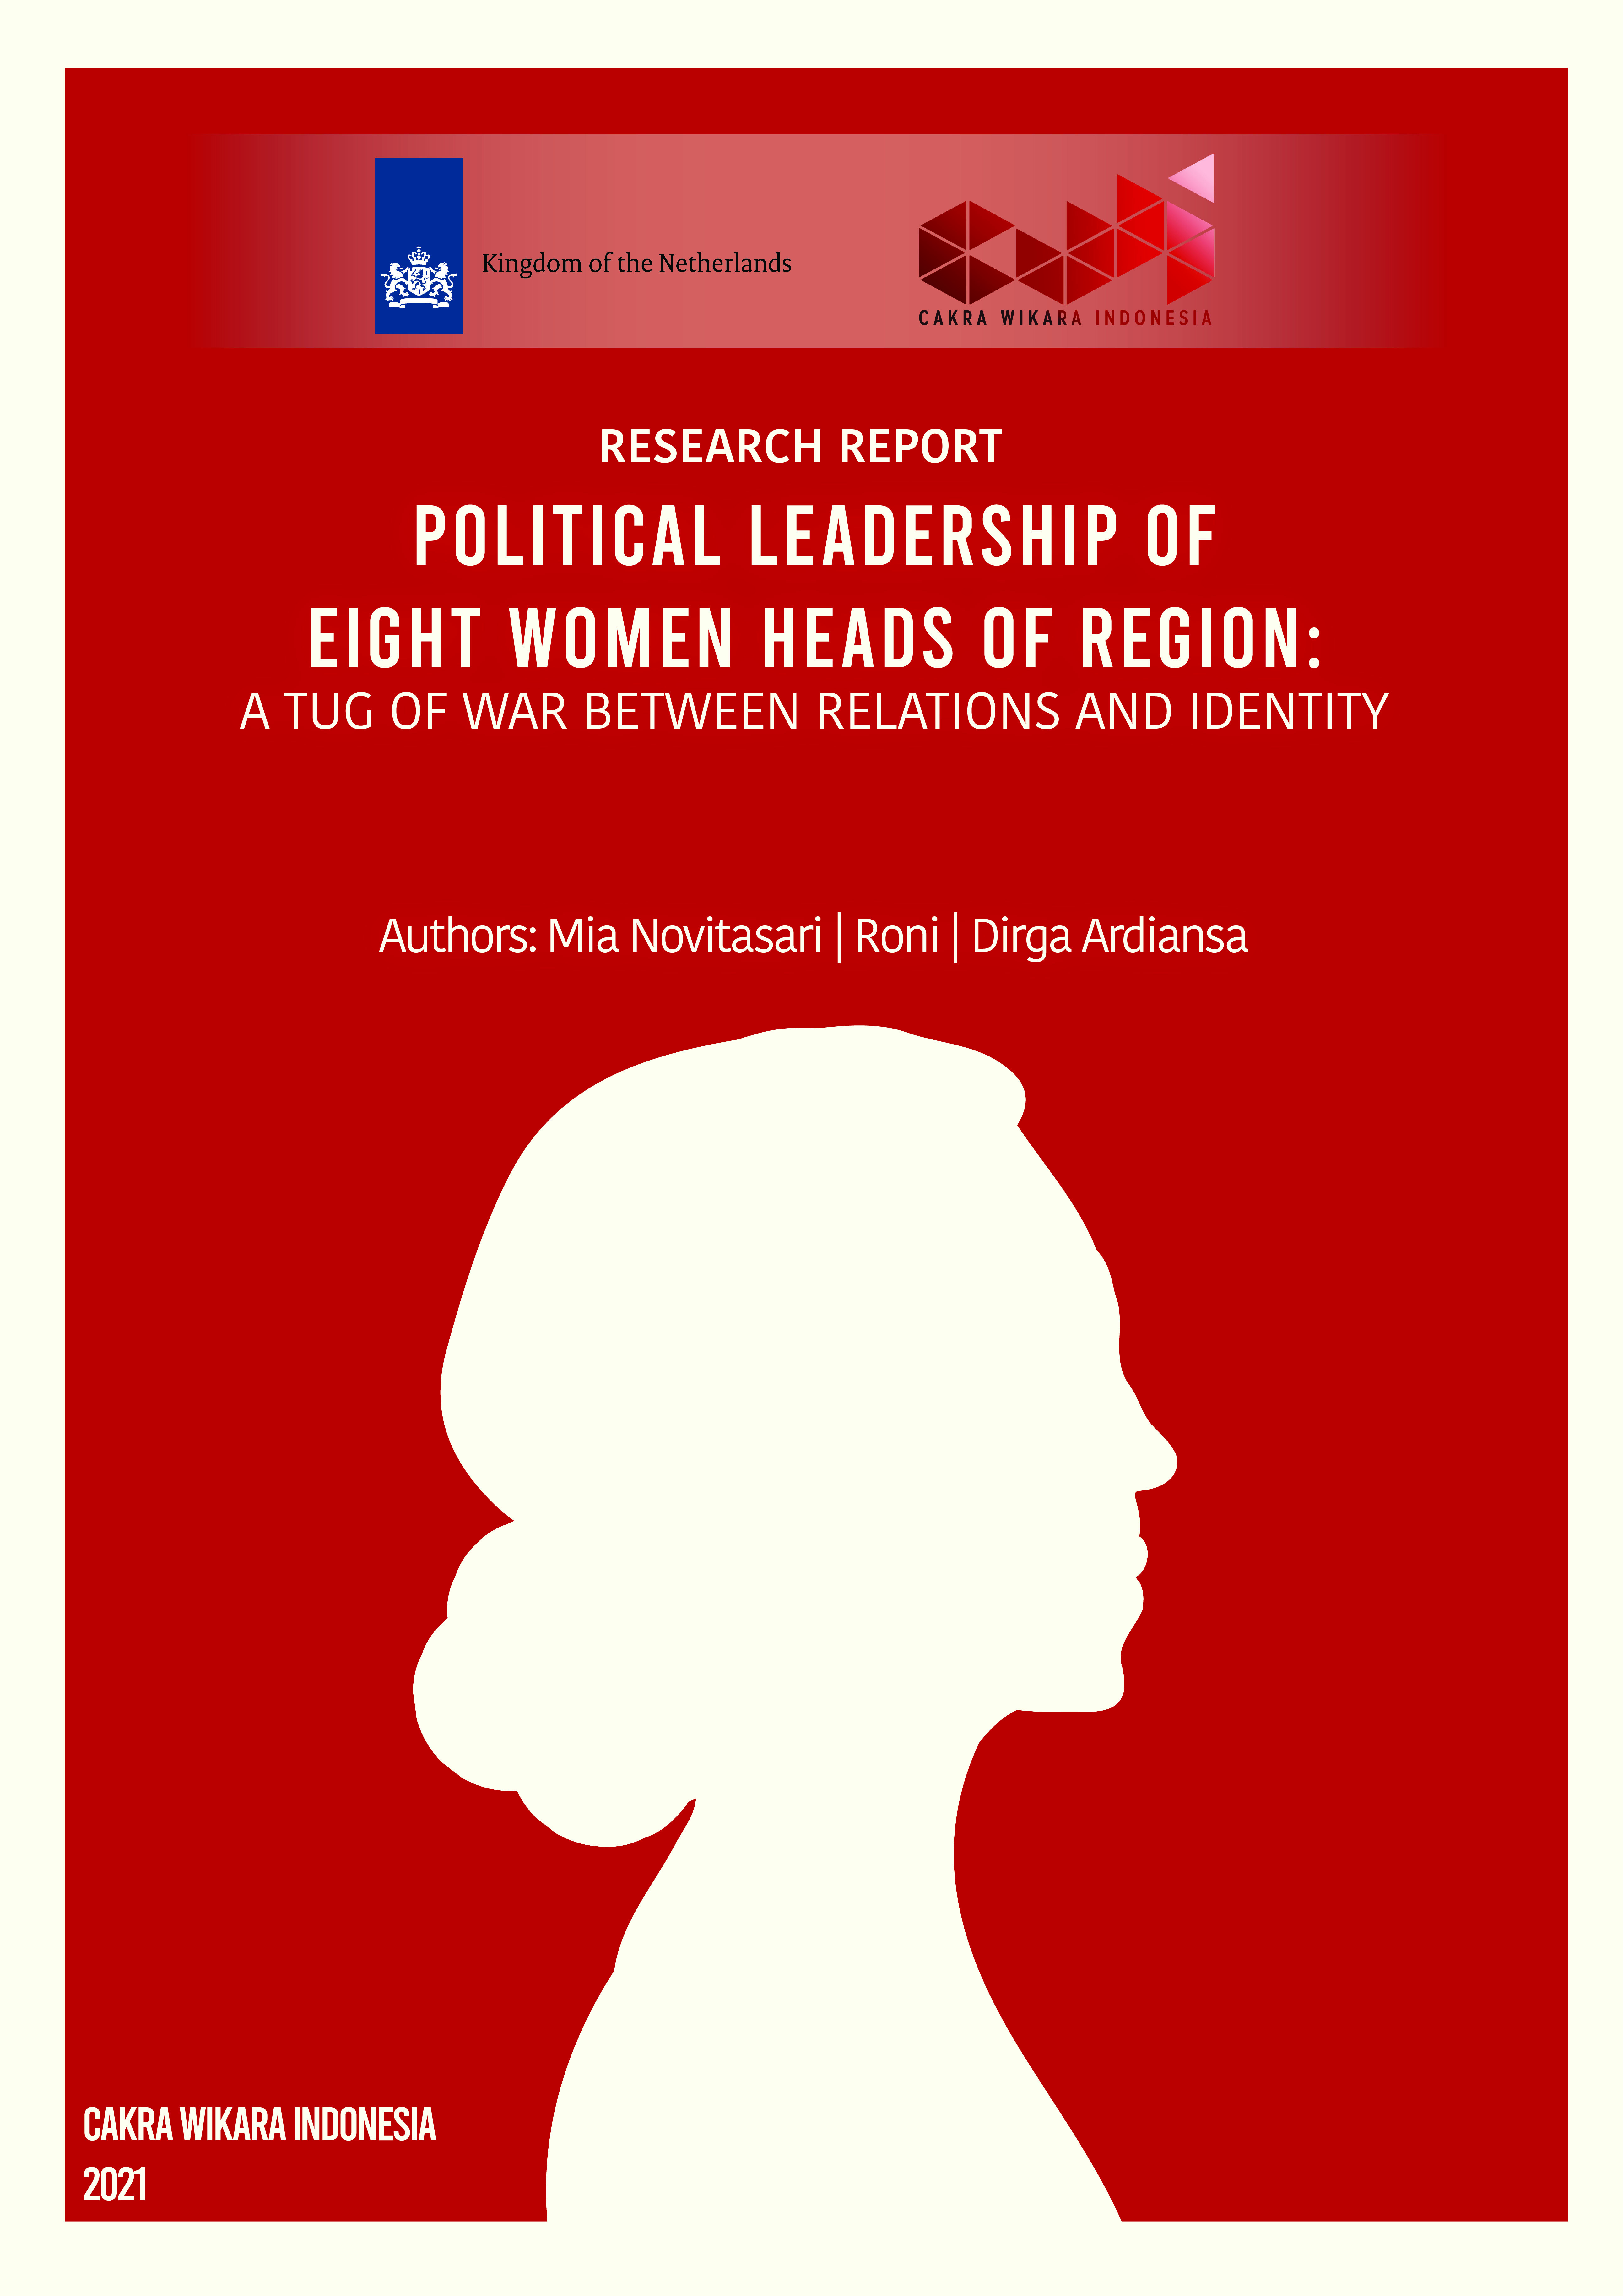 Laporan Riset - Political Leadership of Eight Women Heads of Region: A Tug of War Between Relations and Identity